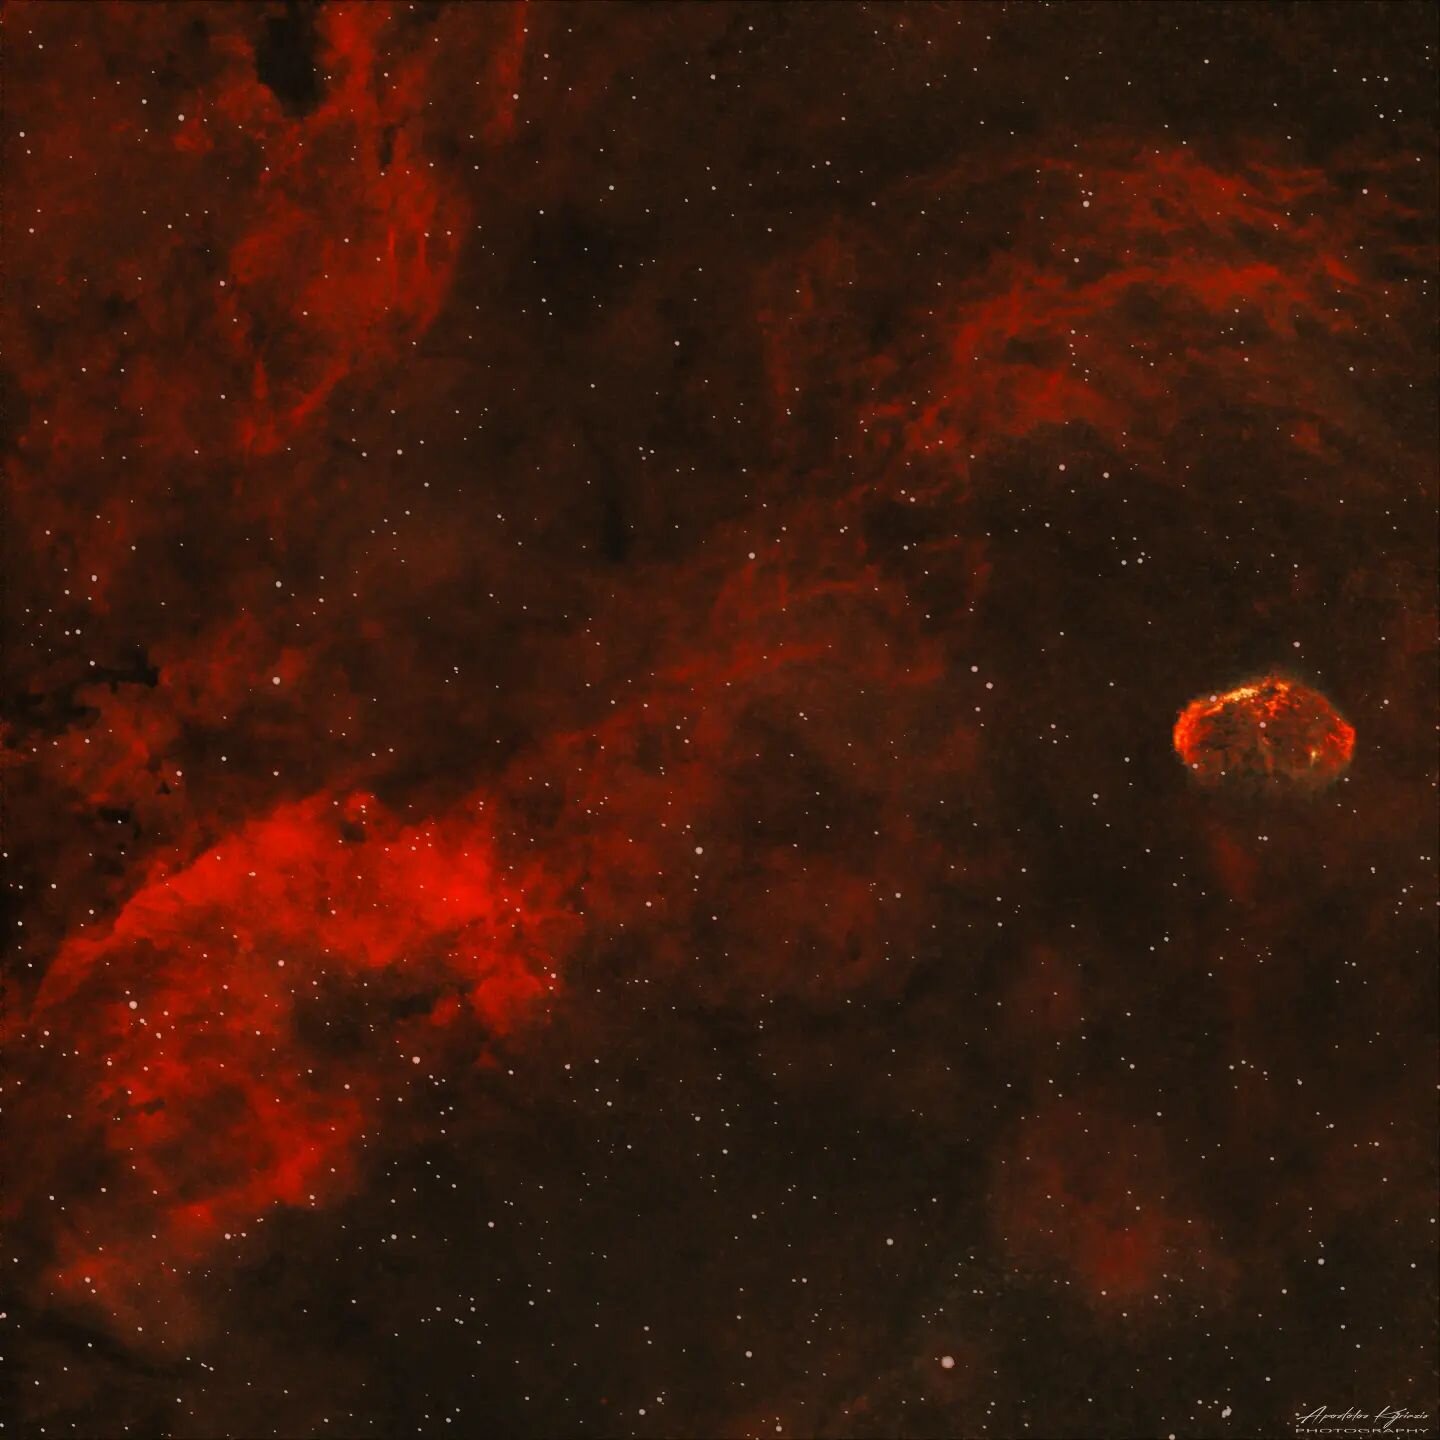 Crescent Nebula
Back to deep sky astrophotography! This is the Crescent nebula (NGC6888 or Sharpless 105), an emission Nebula at the constellation of Cygnus the Swan. Its the result off a shock wave of ejected material and energy from the star WR136 